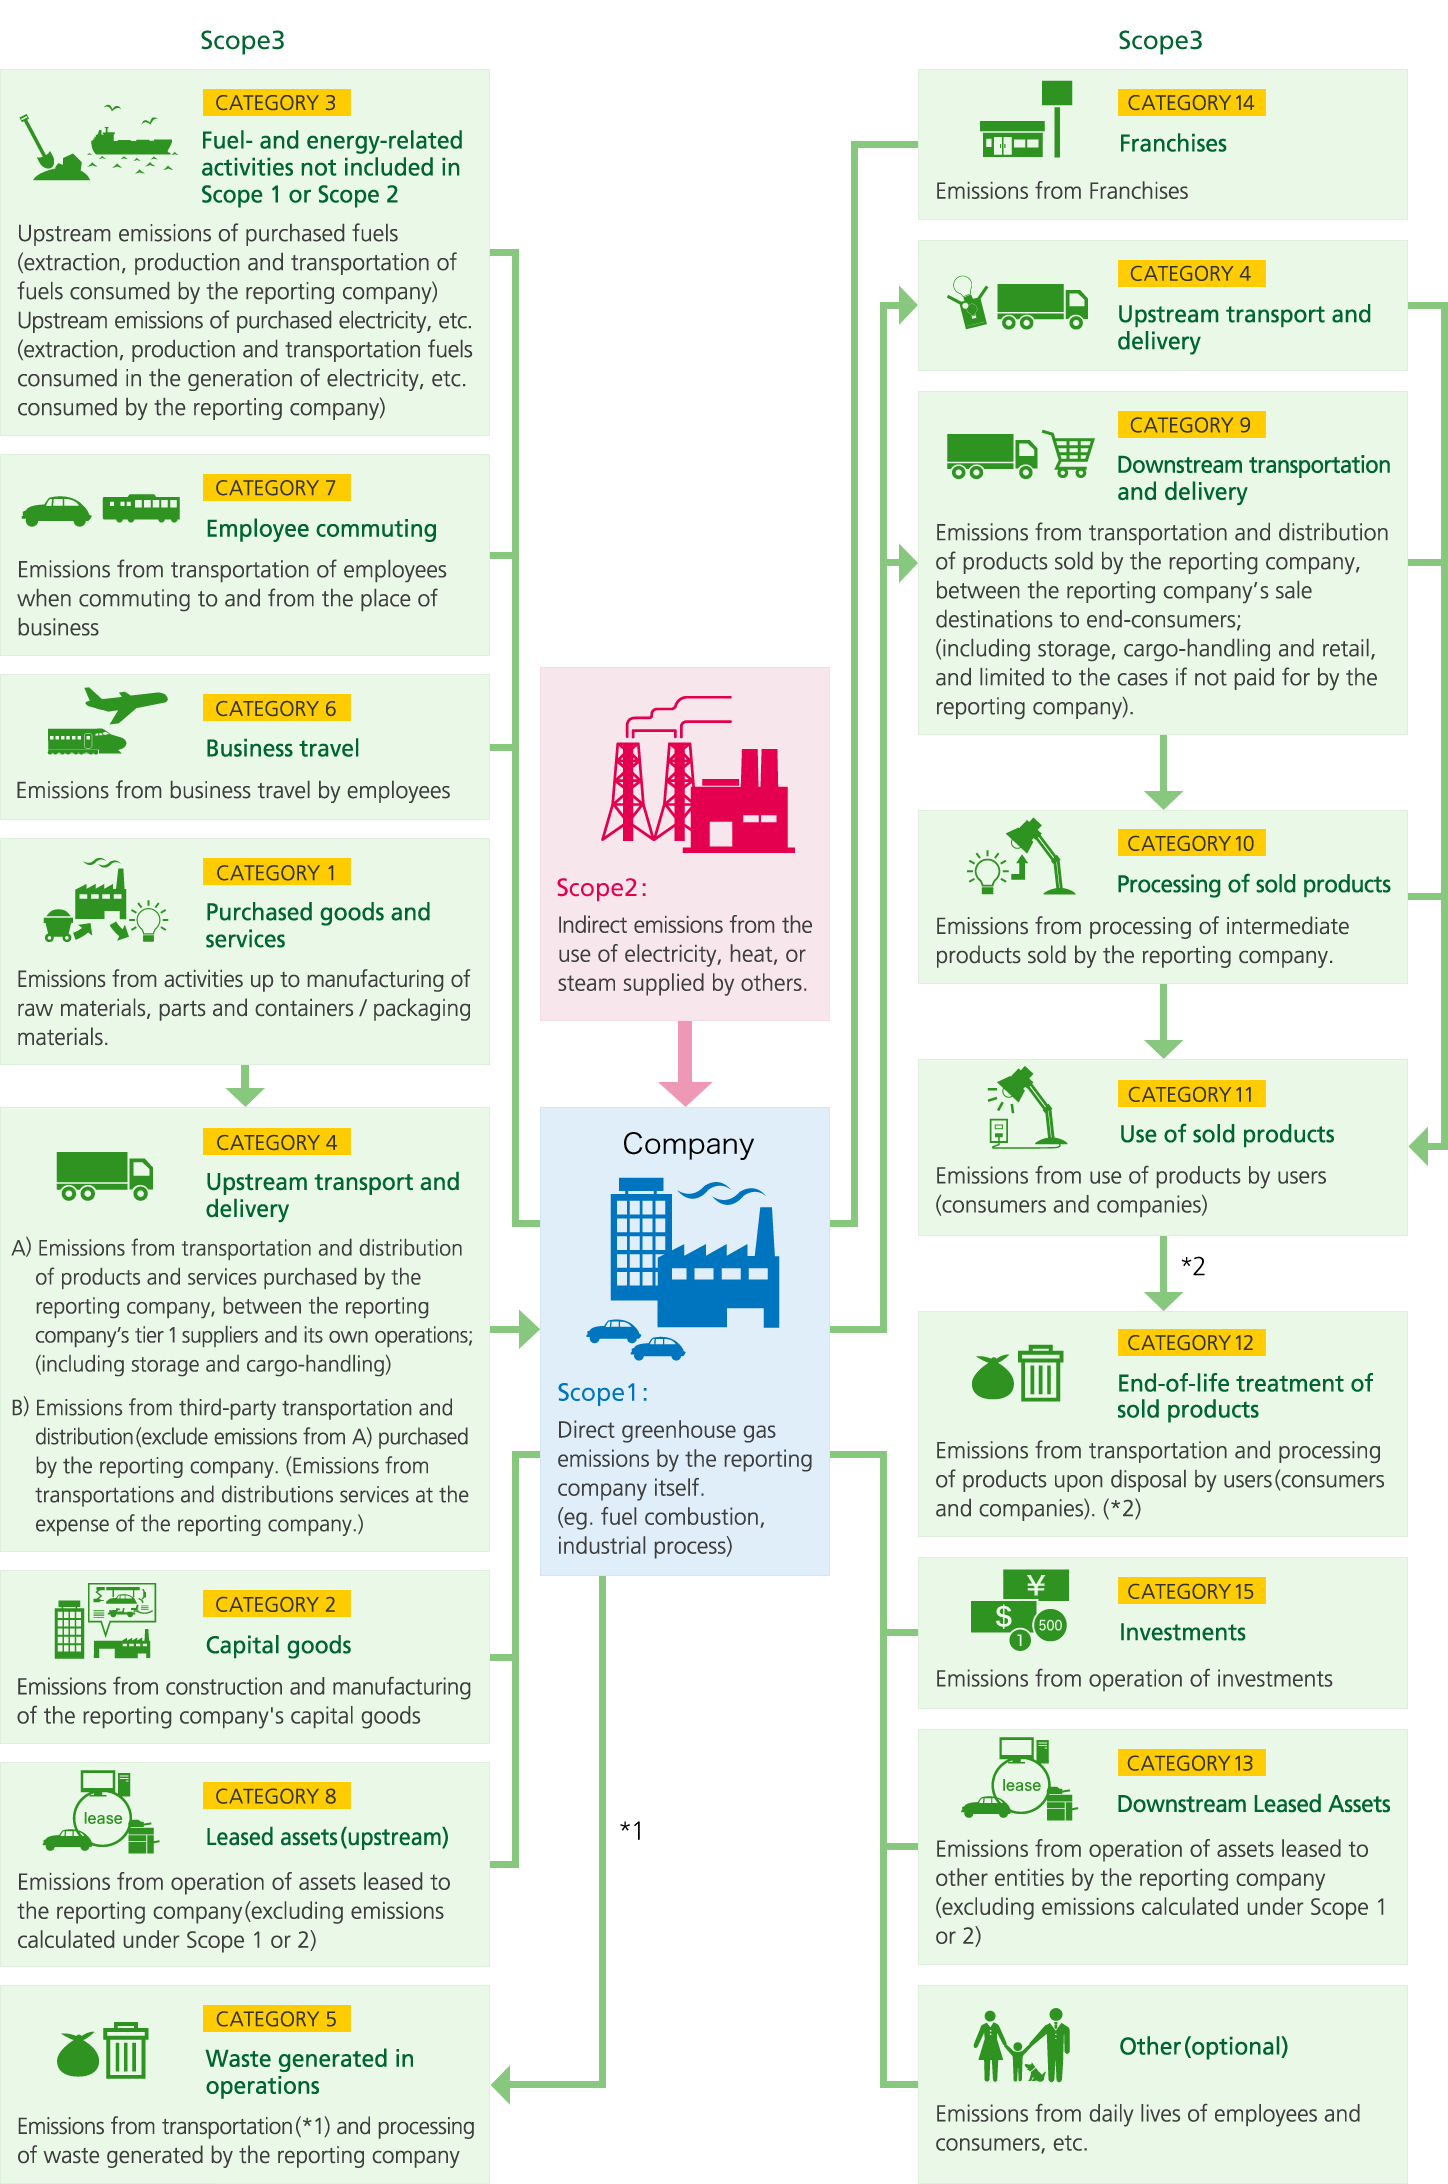 The Ministry of the Environment, Japan “Supply-chain emissions”